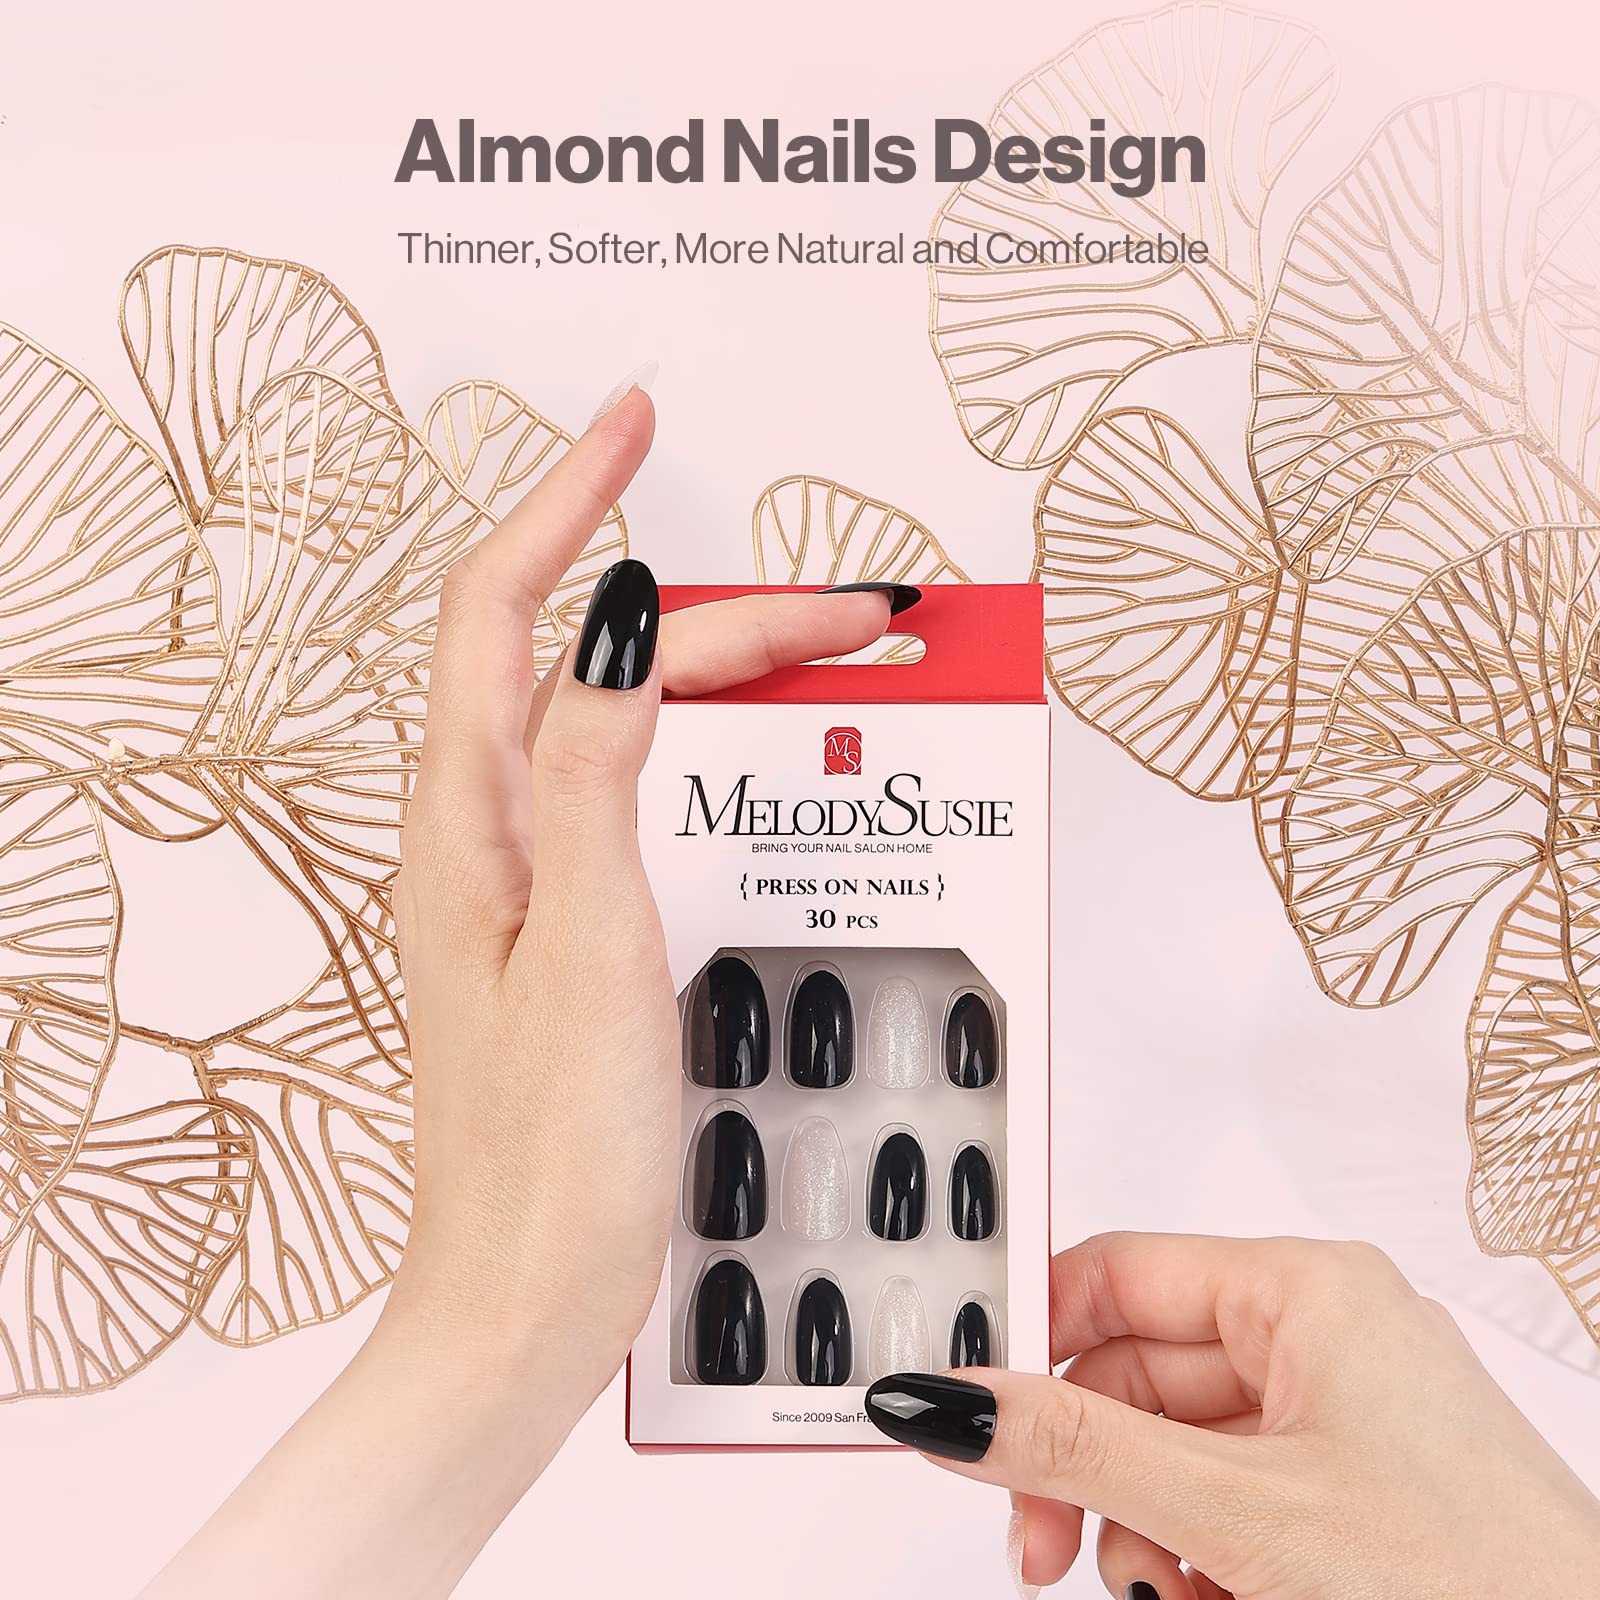 15 Almond Shaped Nail Designs - Cute Ideas for Almond Nails